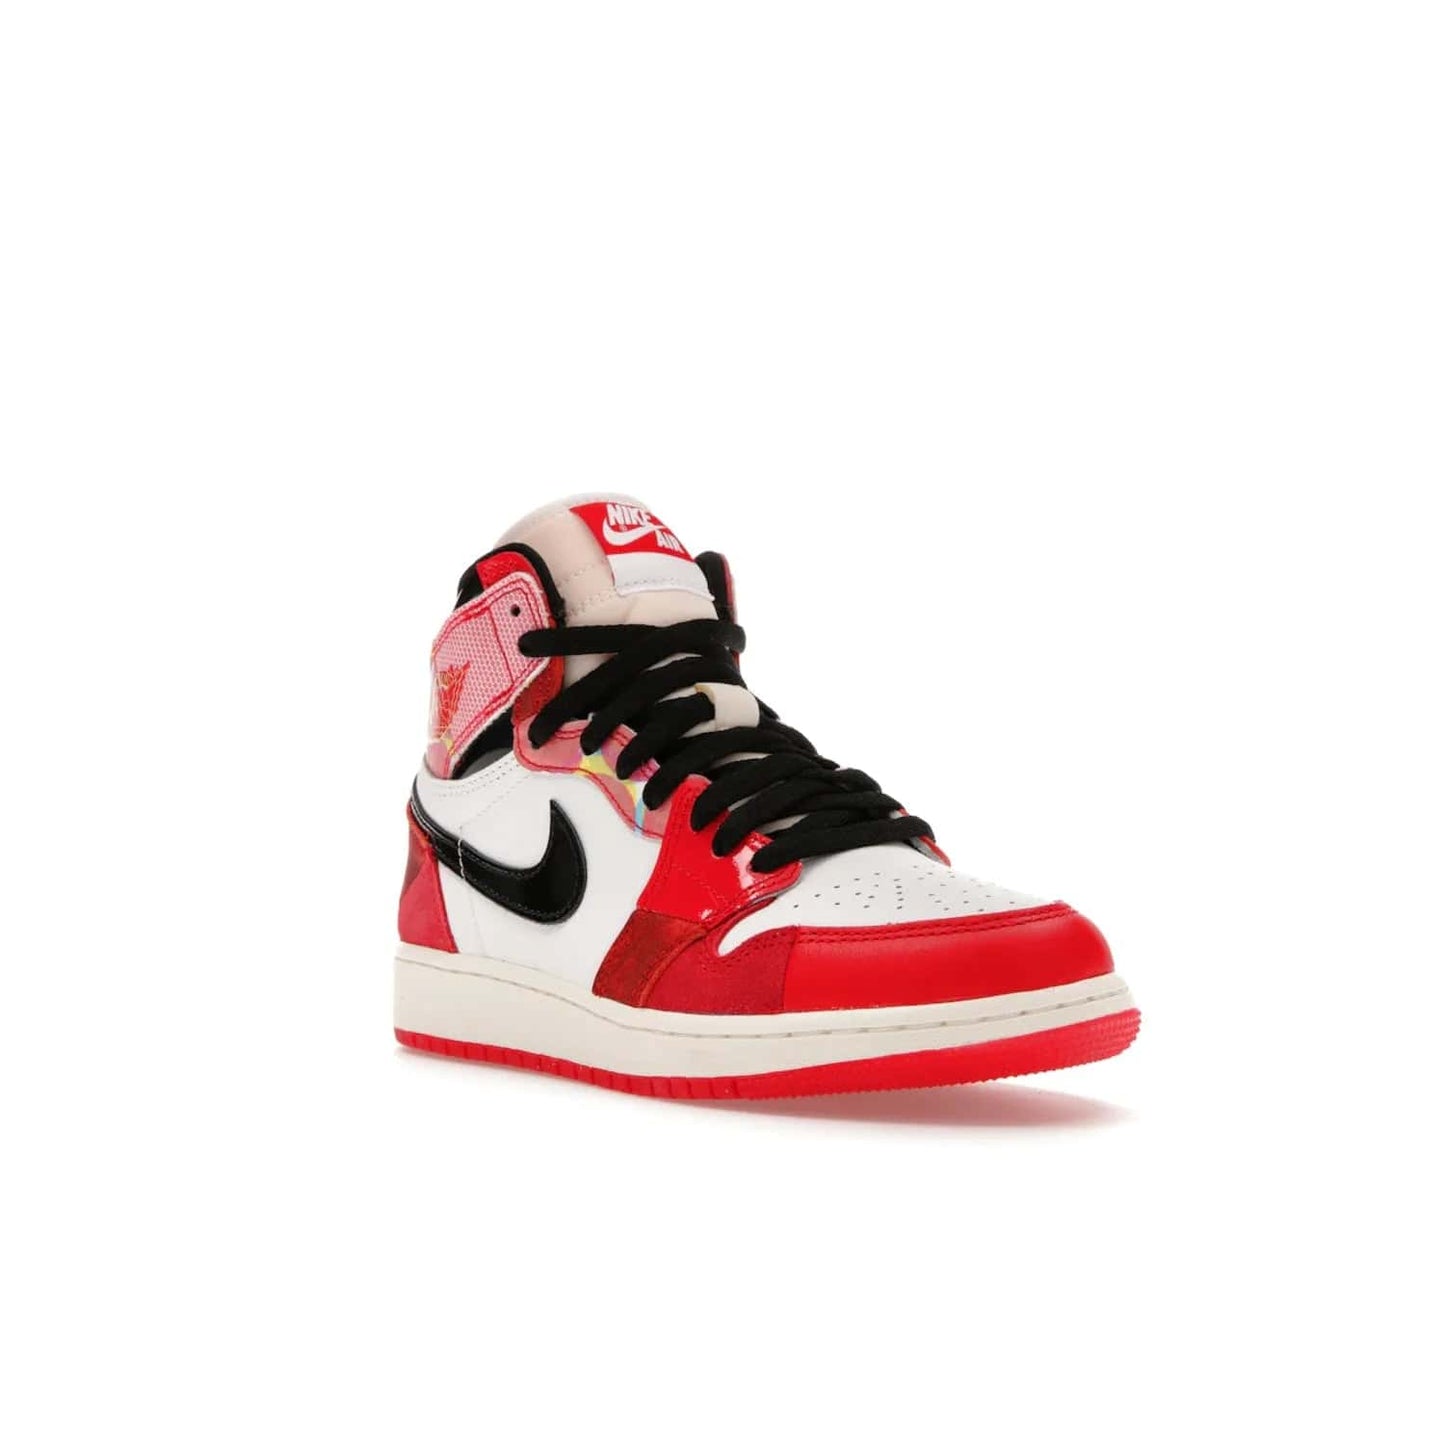 Jordan 1 High OG Spider-Man Across the Spider-Verse (GS) - Image 6 - Only at www.BallersClubKickz.com - Iconic basketball style Jordan 1 High OG Spider-Man Across the Spider-Verse hits the streets May 20th. University Red, Black, and White colorblocking and sleek design will make this shoe a must-have.